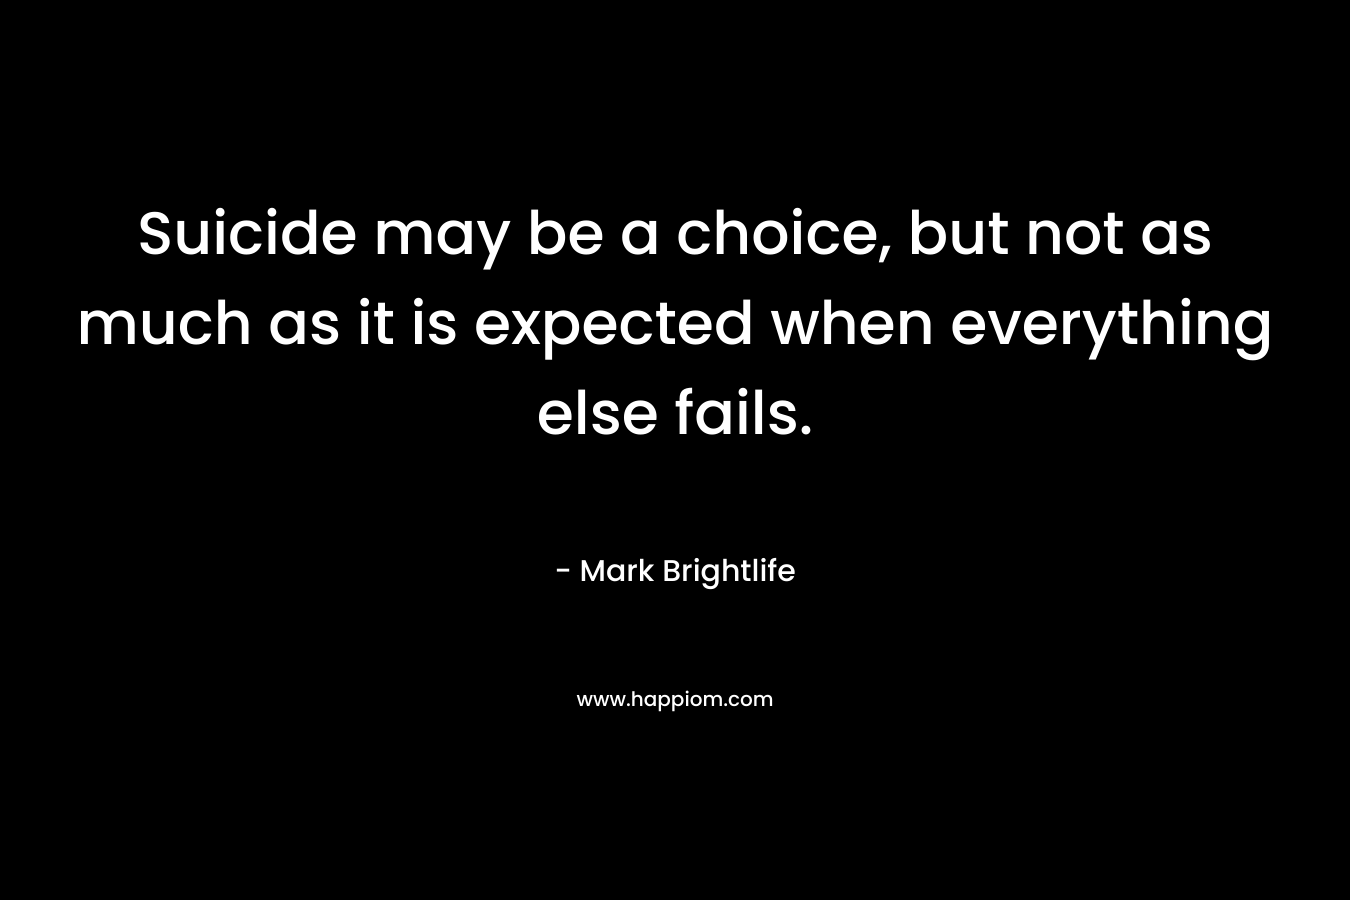 Suicide may be a choice, but not as much as it is expected when everything else fails.